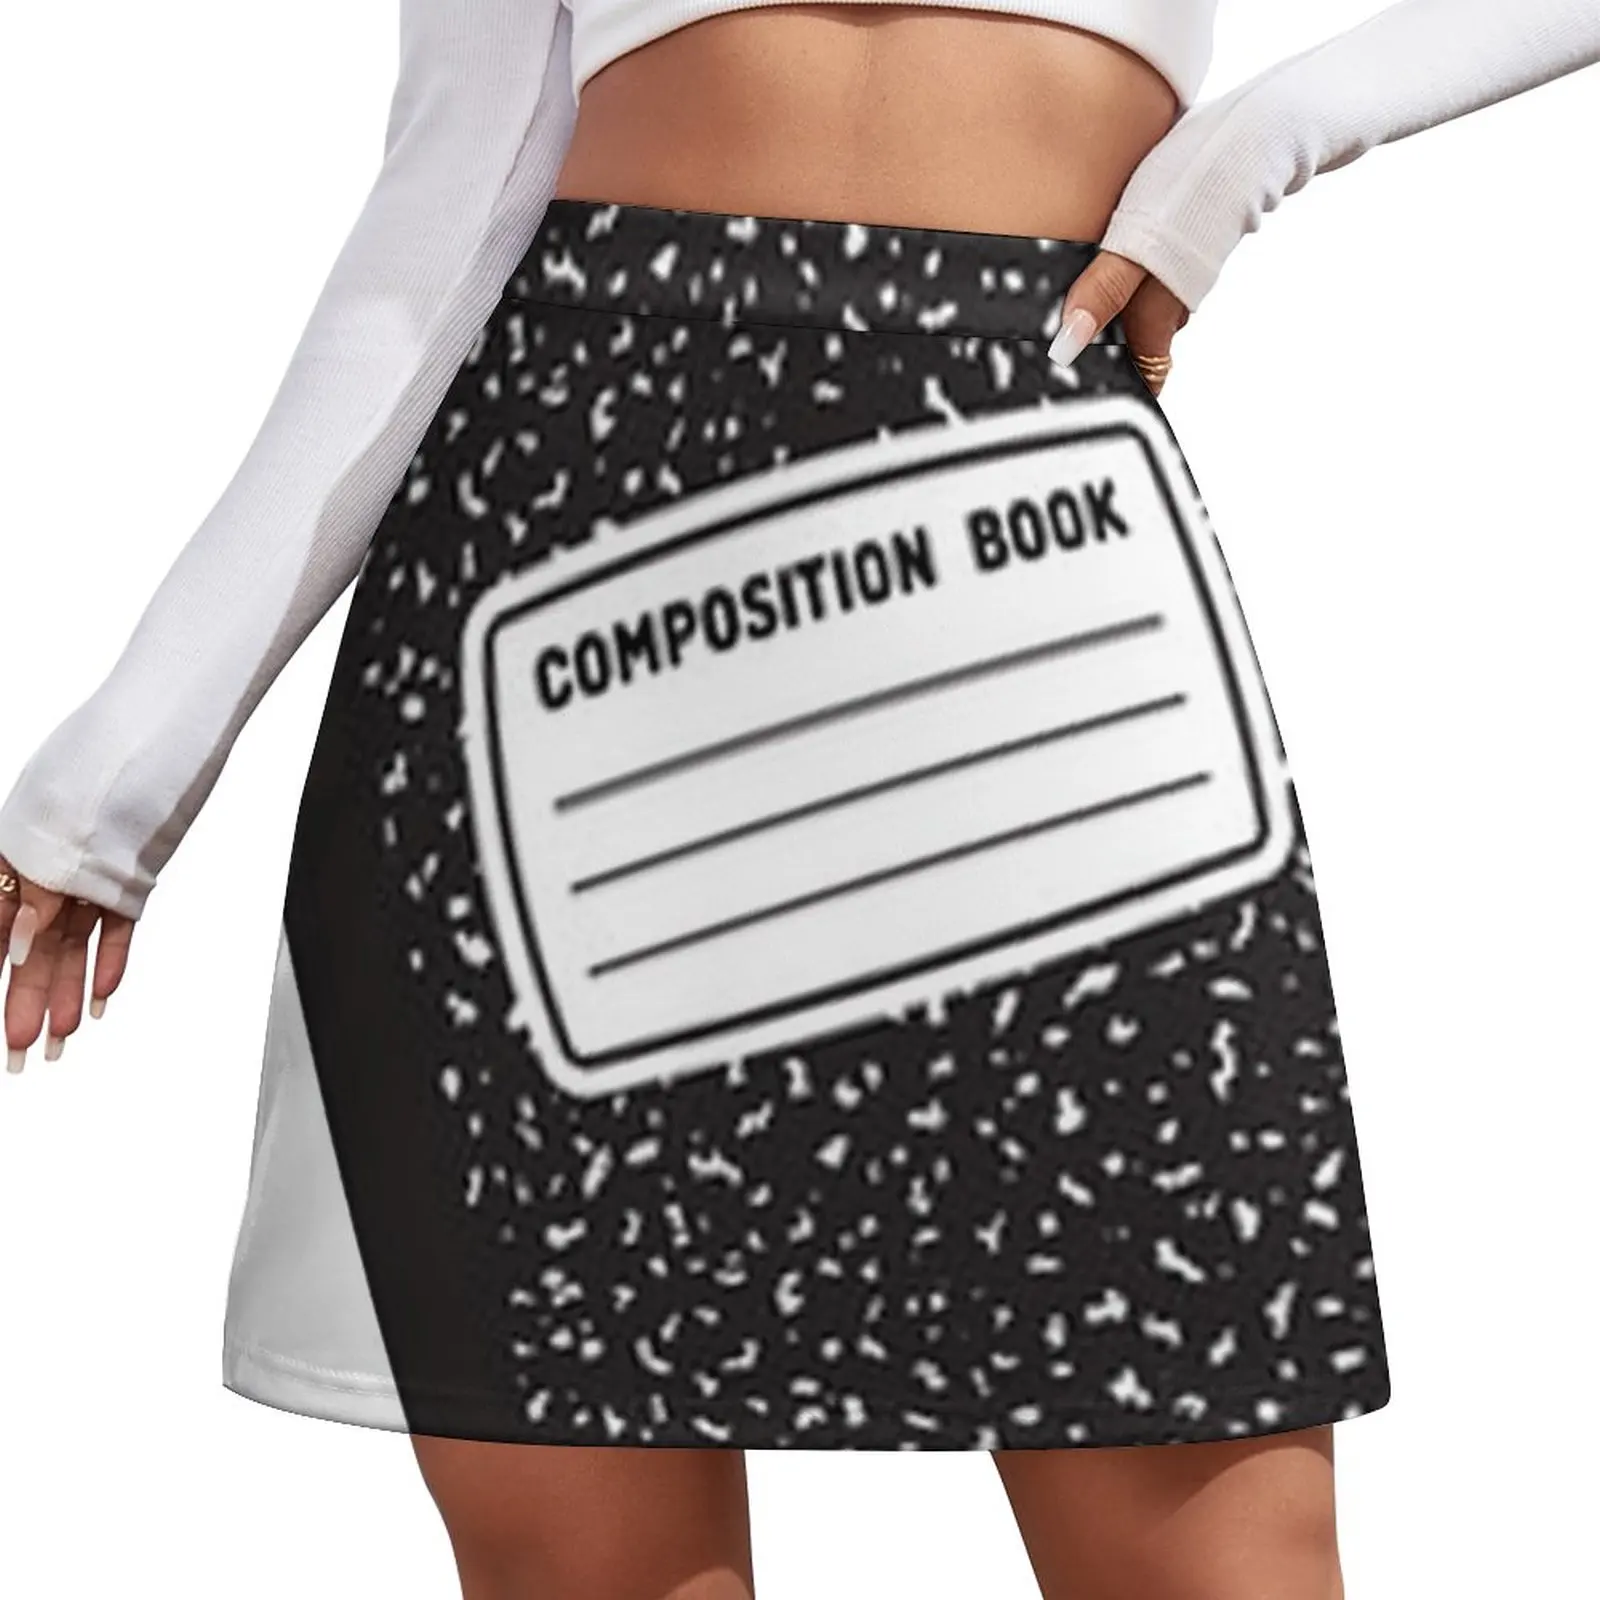 Writing - Composition Book Mini Skirt midi skirt for women Skirt satin 3 pcs speech cards study index small spiral notepads for writing paper mini papers travel pocket notebook